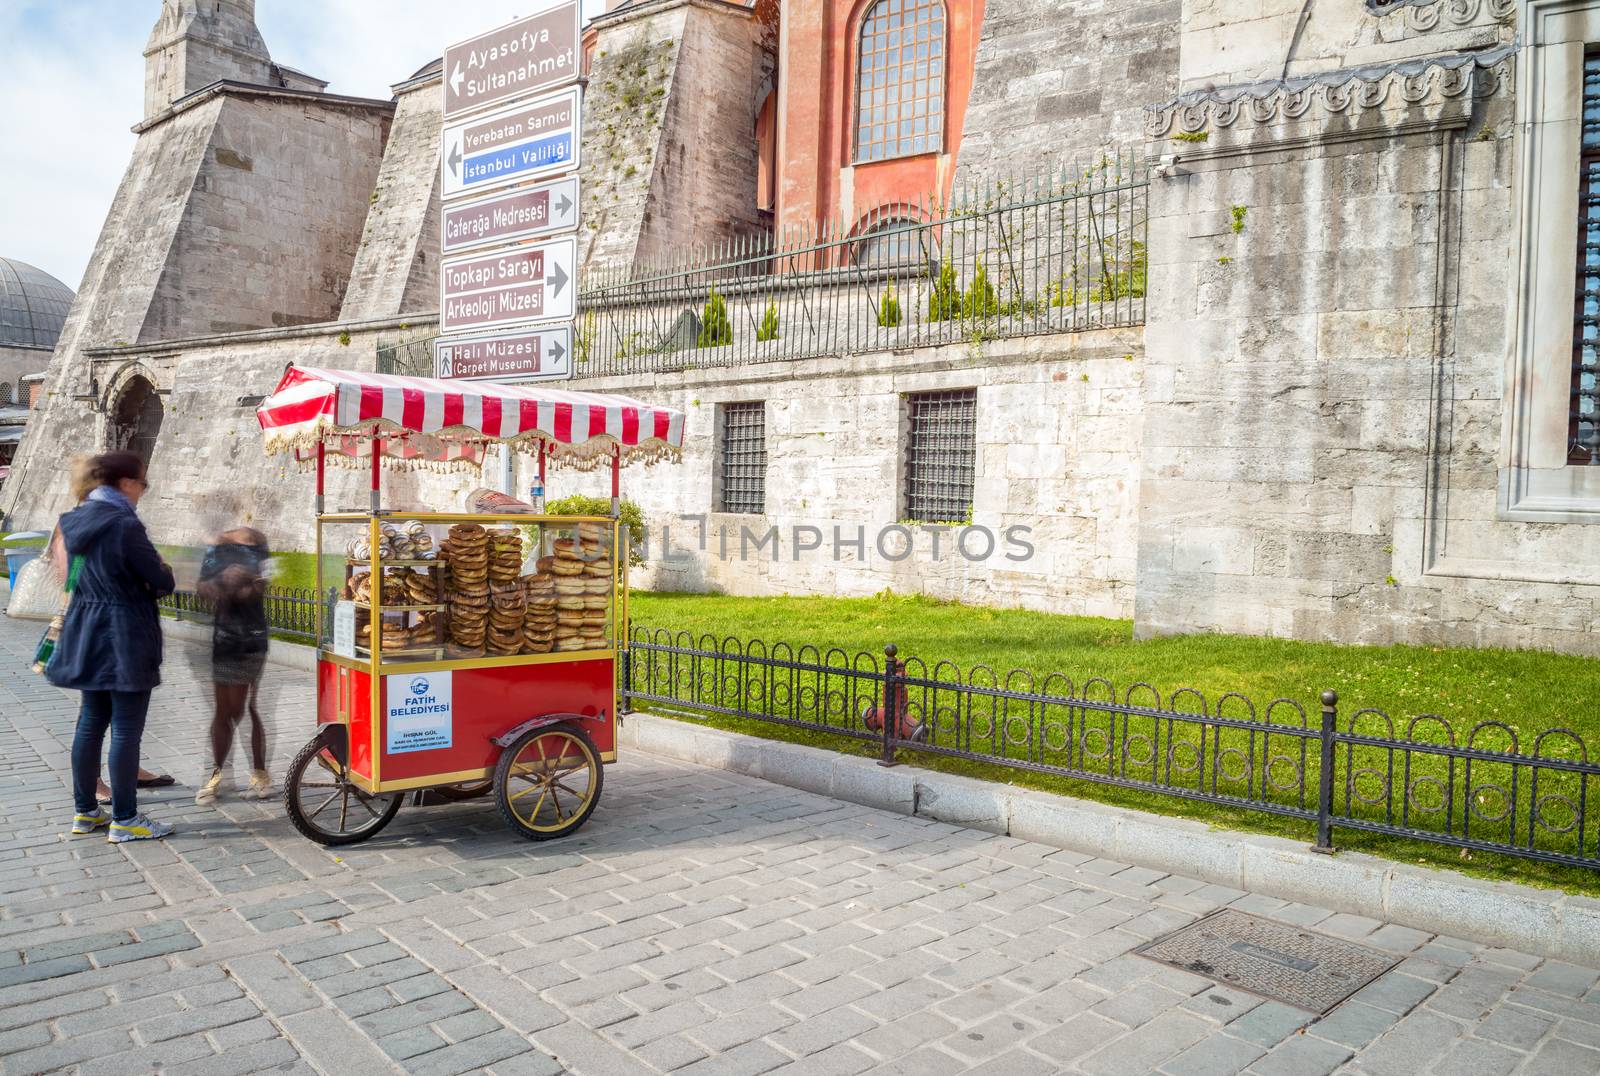 ISTANBUL, TURKEY - SEP 15: Fresh roasted sweet corn vendor as seen around most areas and tourist attractions on September 15, 2014 in Istanbul, Turkey. Part of the healthy fast food culture in the city.